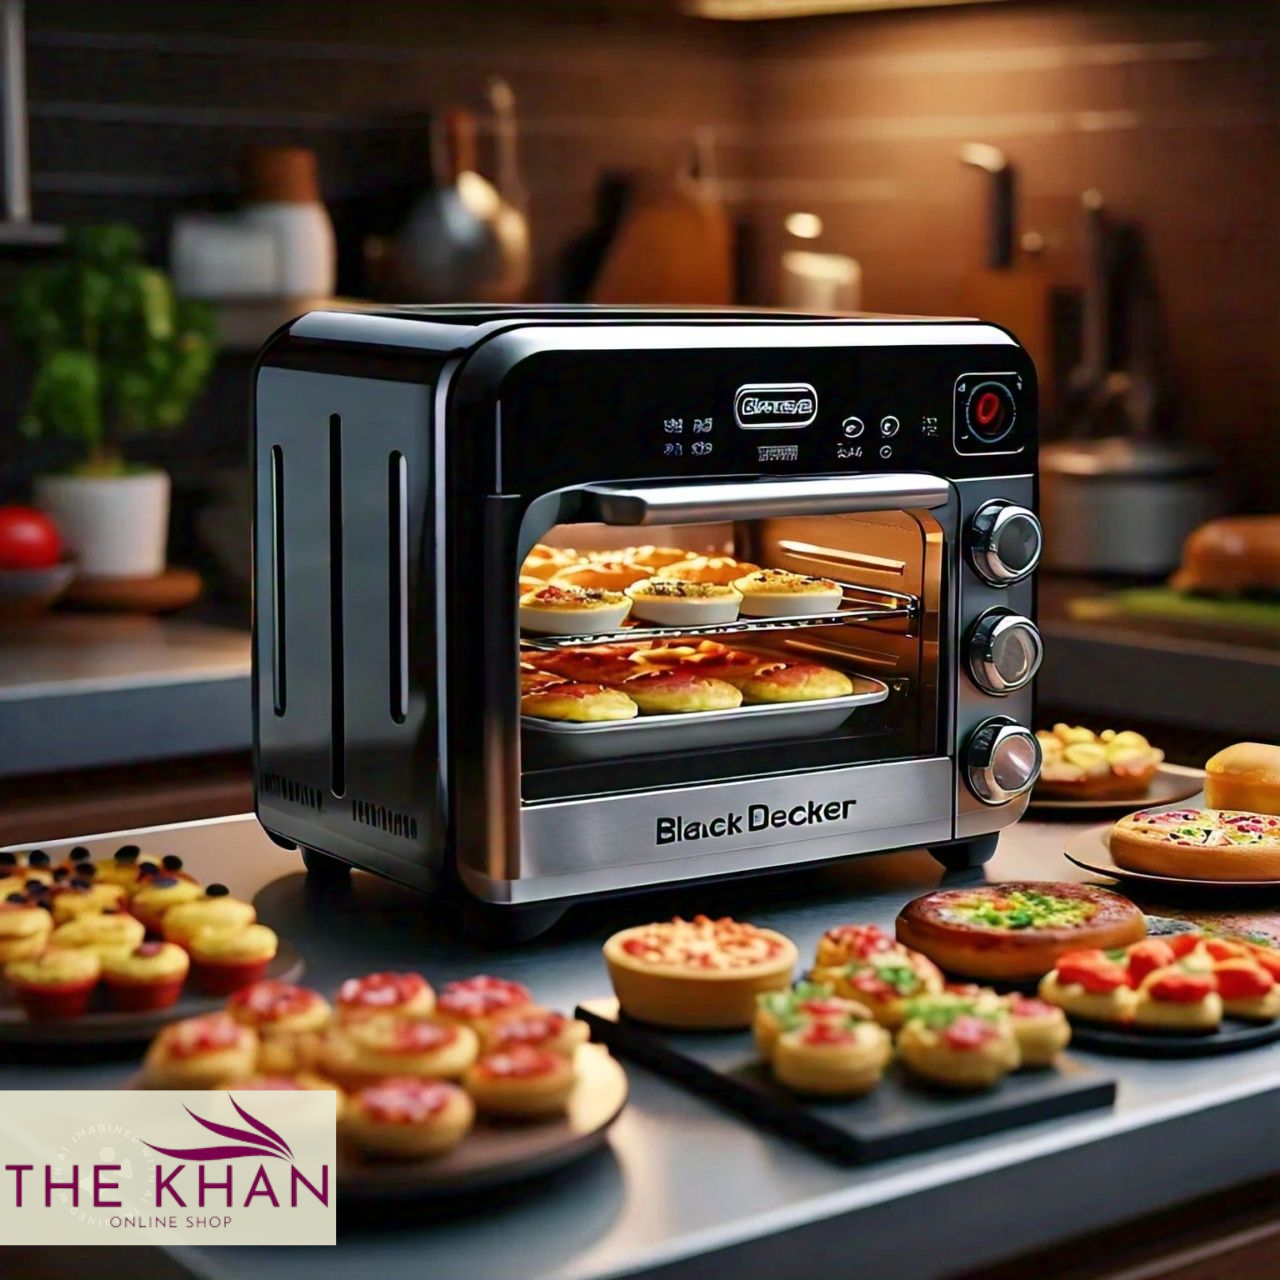 Mastering Your Black Decker Oven Toaster: The Ultimate Guide